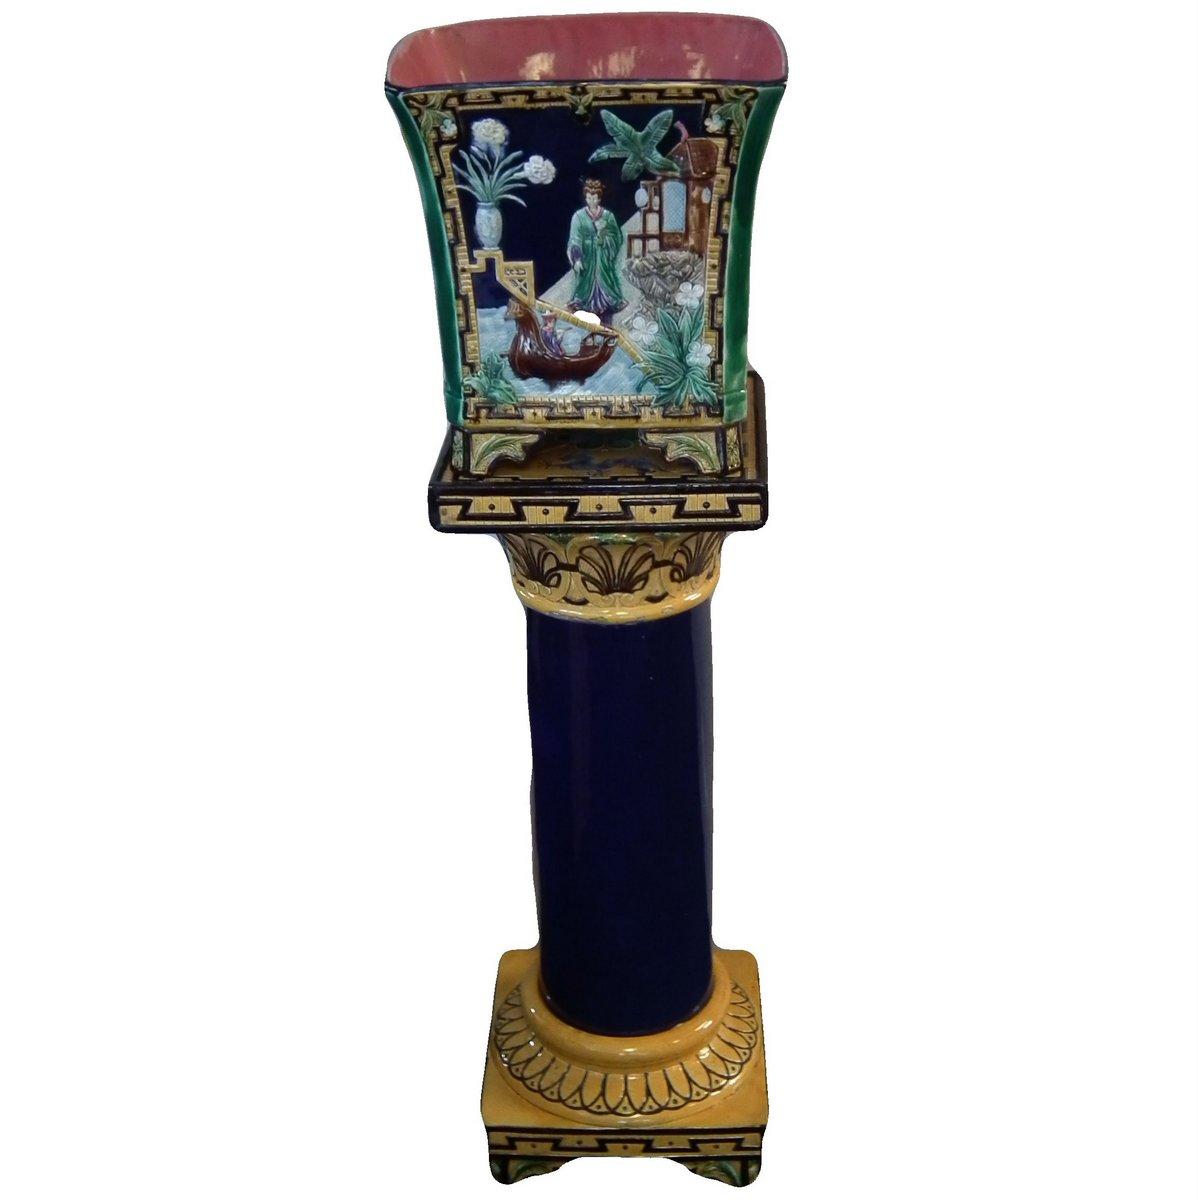 Majolica jardinière and stand which features pictorial panels: Two depicting oriental scenes with figures. The other two with a stork in flight over water. Coloration: ochre, green, white, are predominant.